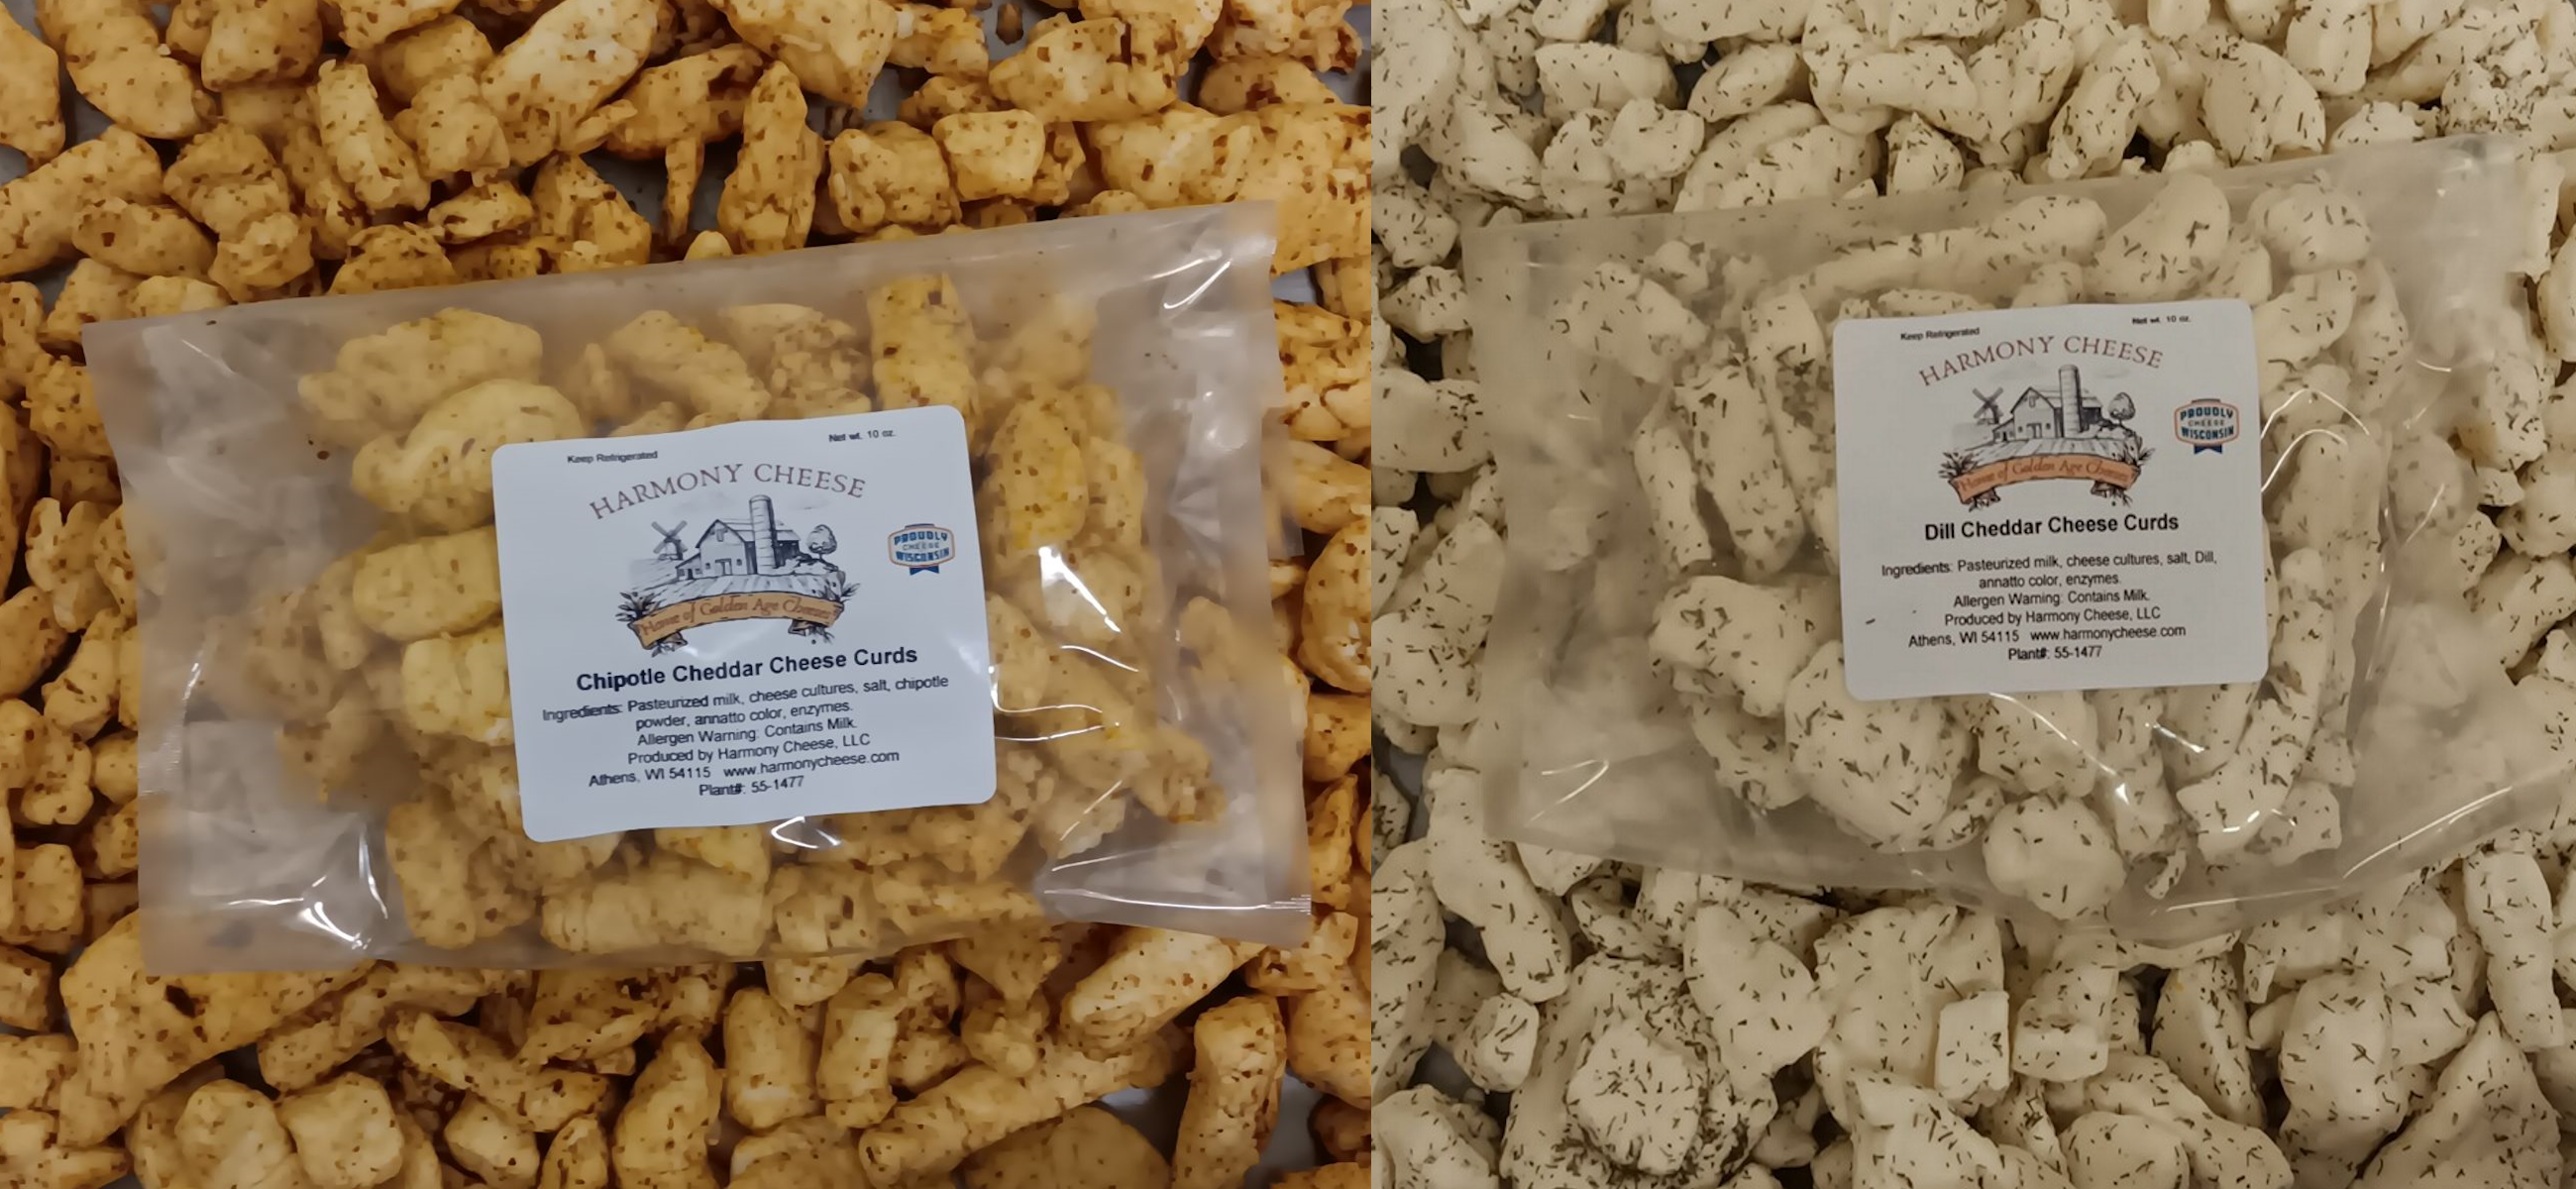 Fresh Wisconsin Cheese Curds by Harmony Cheese